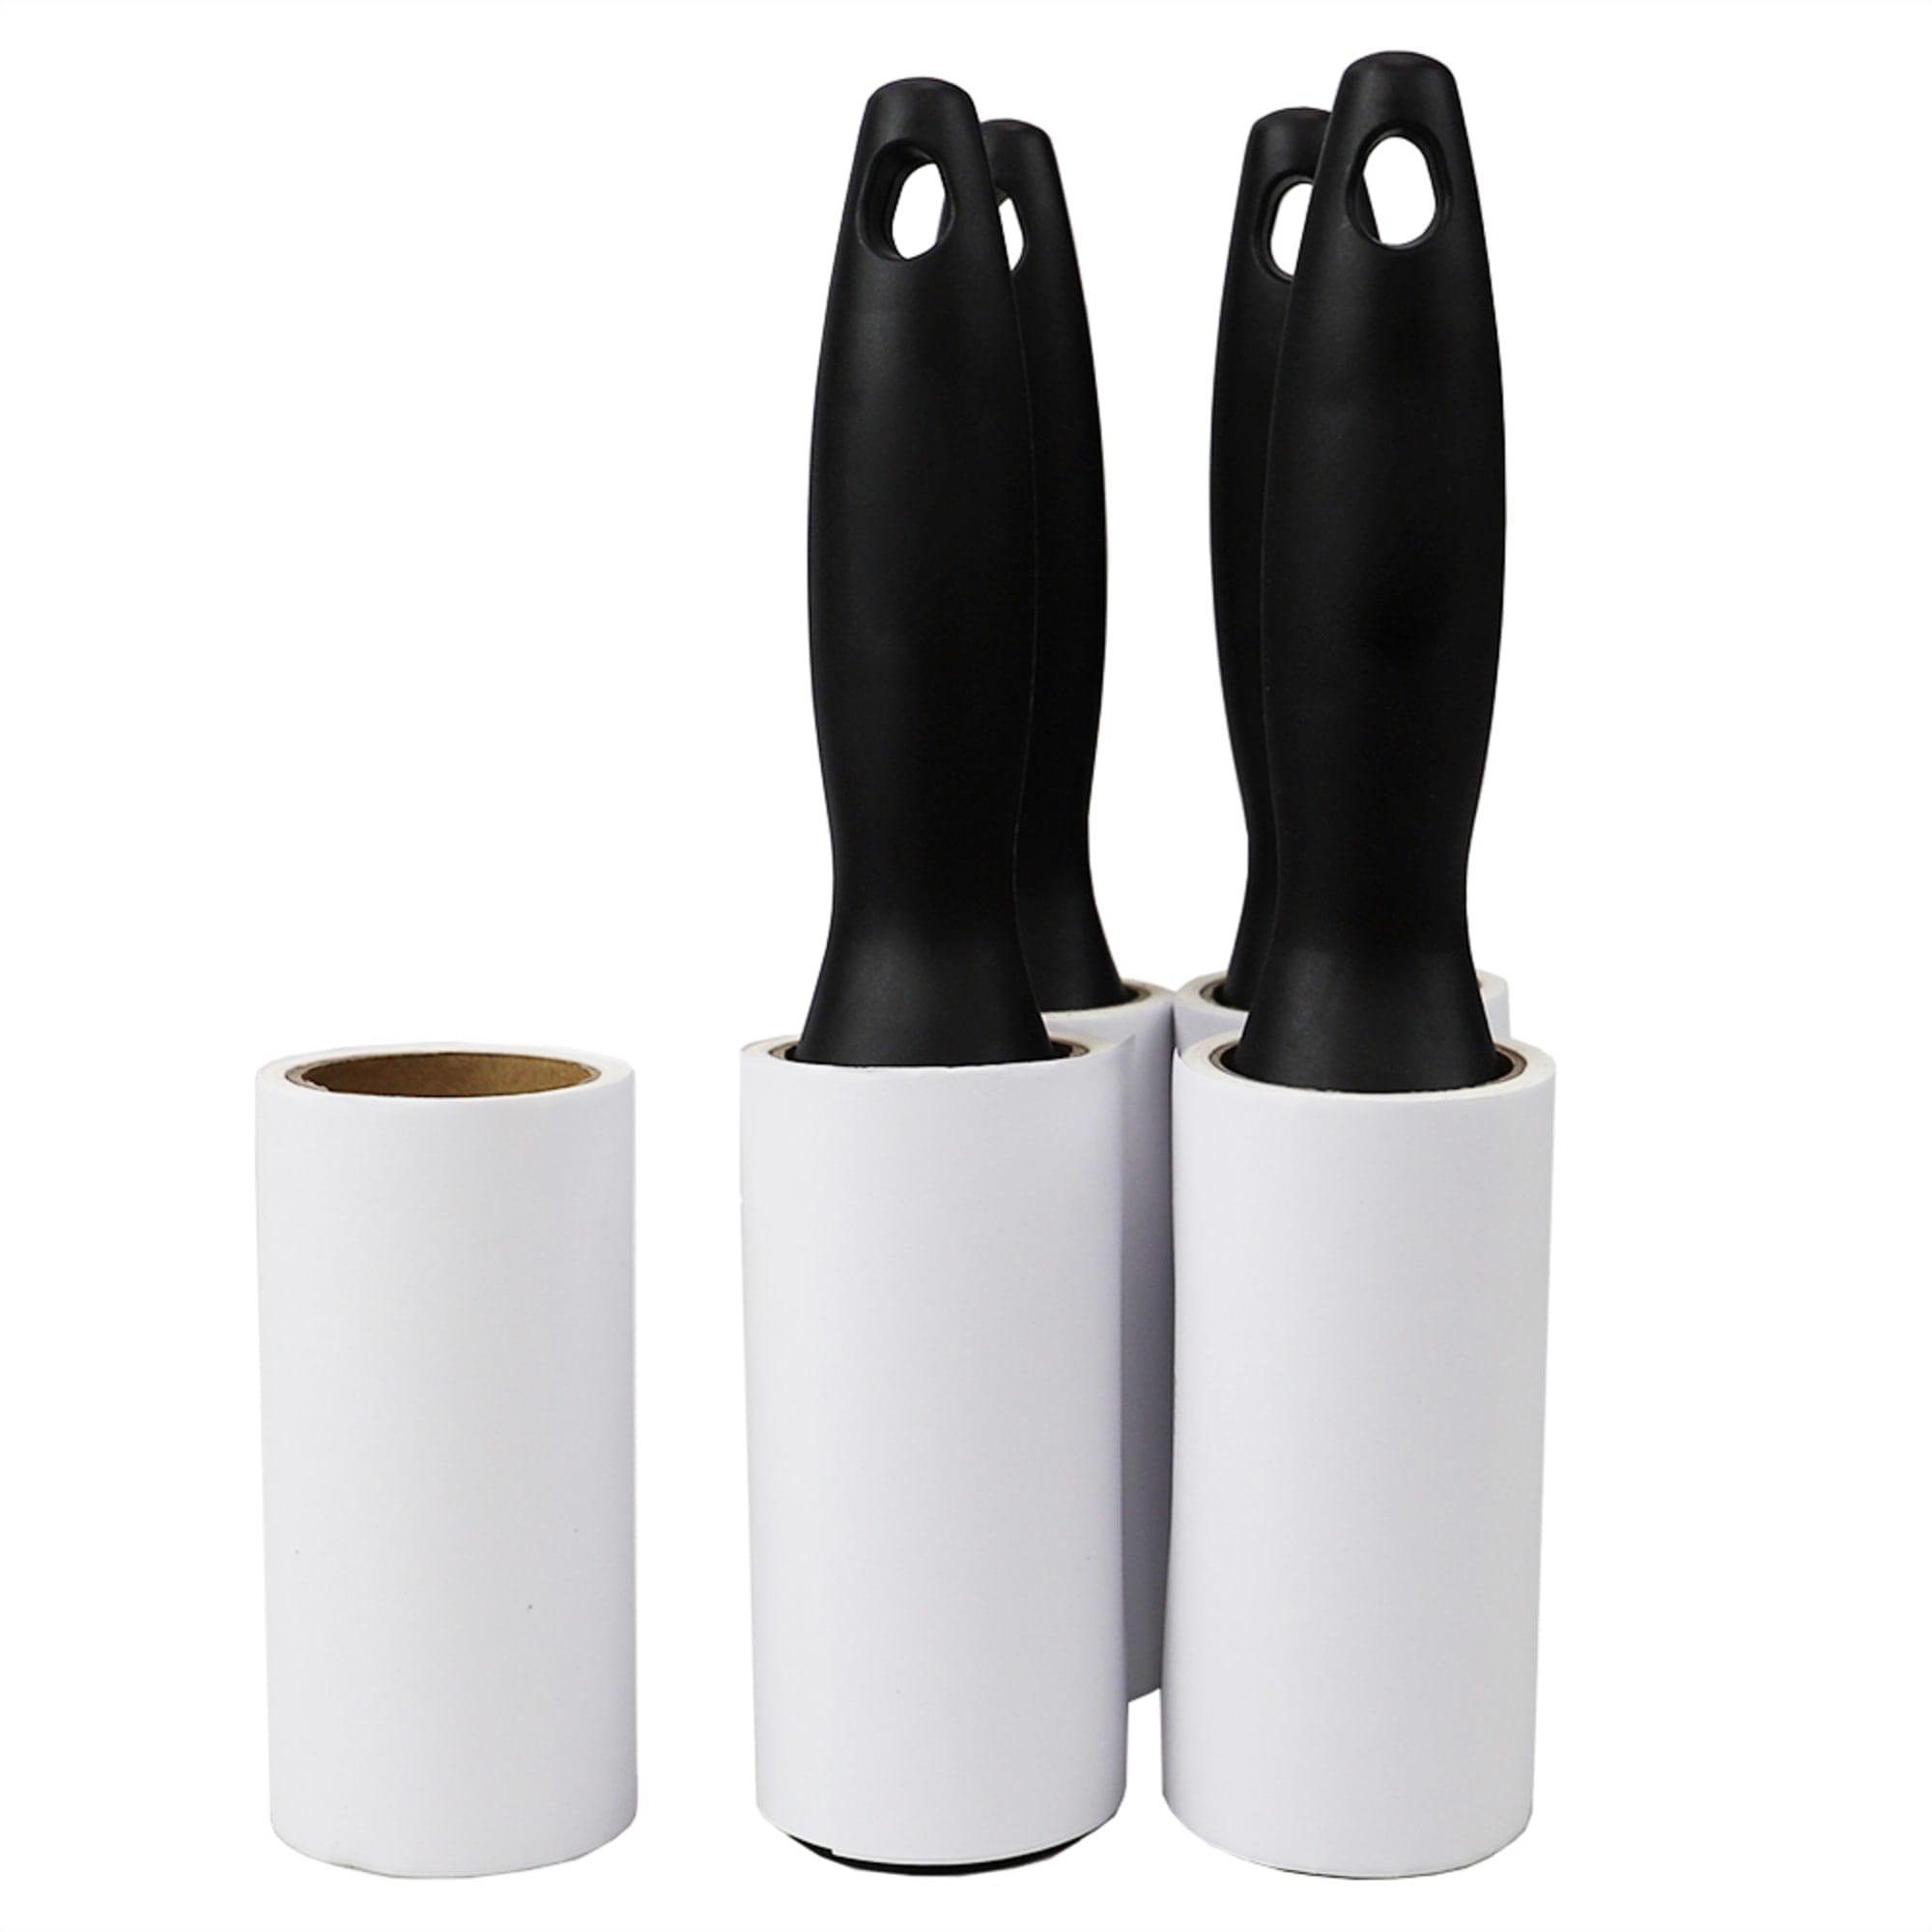 Home Basics Pack of 5 Plastic Lint Rollers, Black $5.00 EACH, CASE PACK OF 24